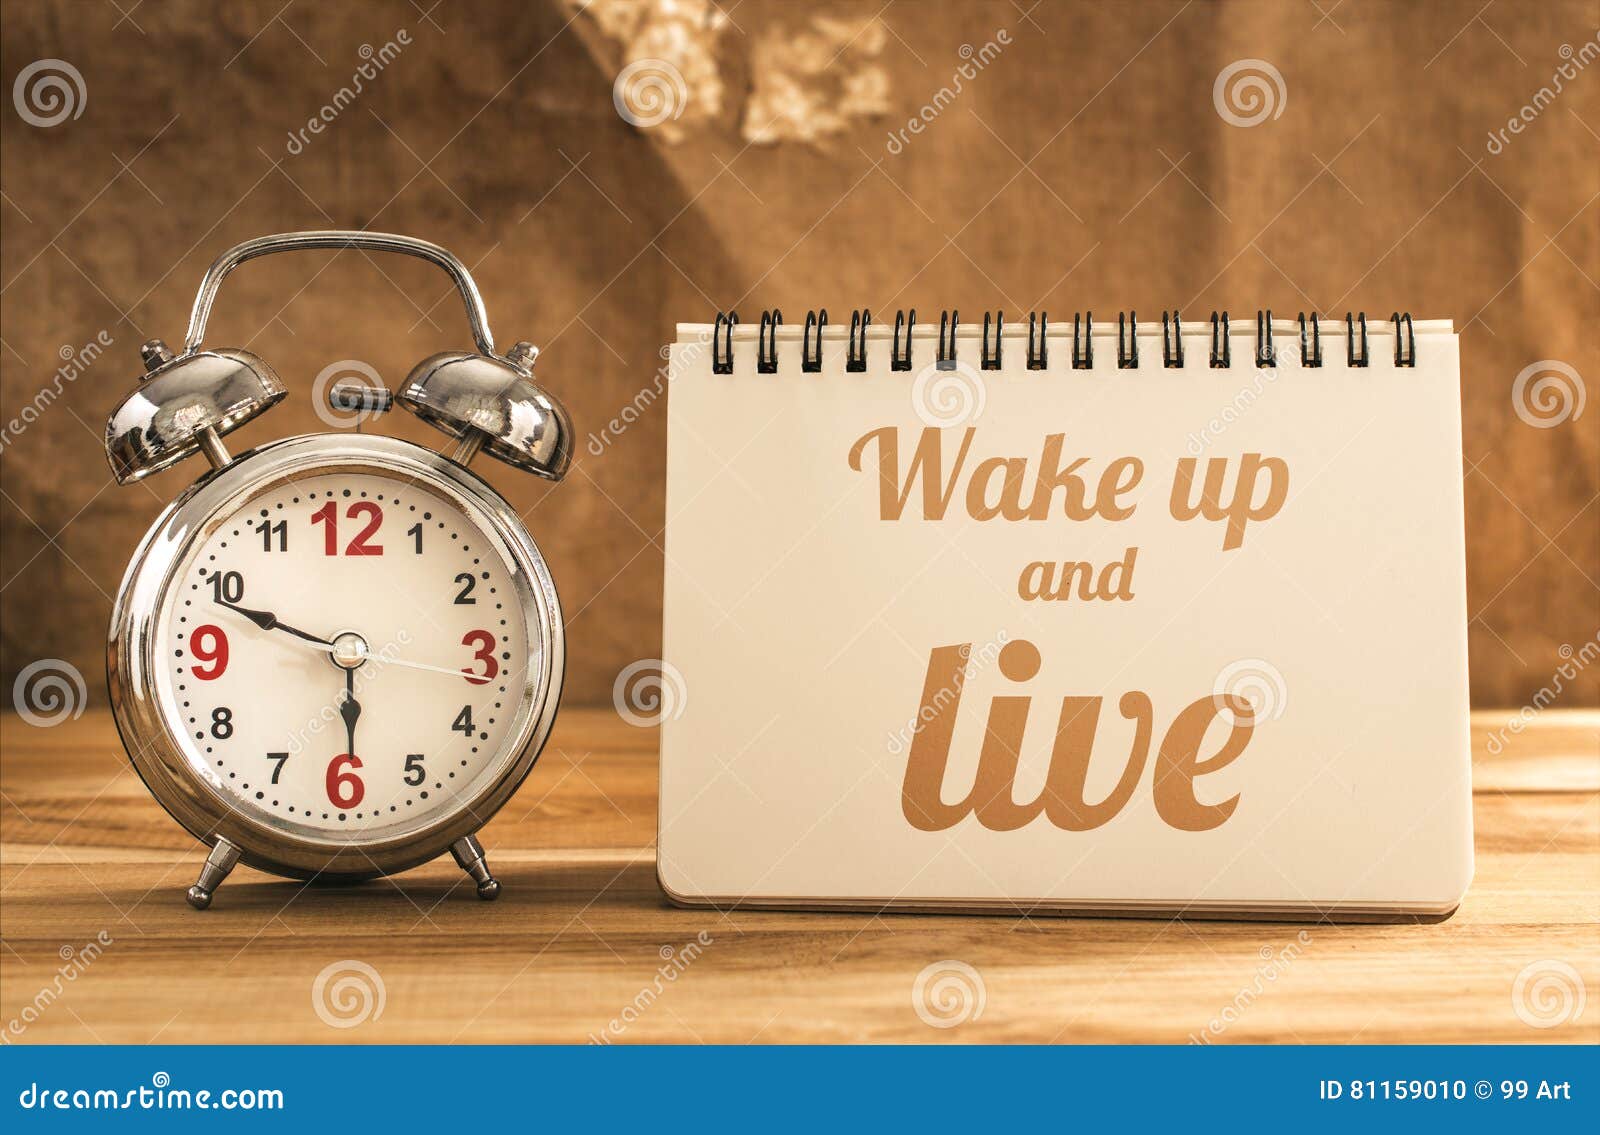 wake up and live text on notebook with alarm clock on wood table